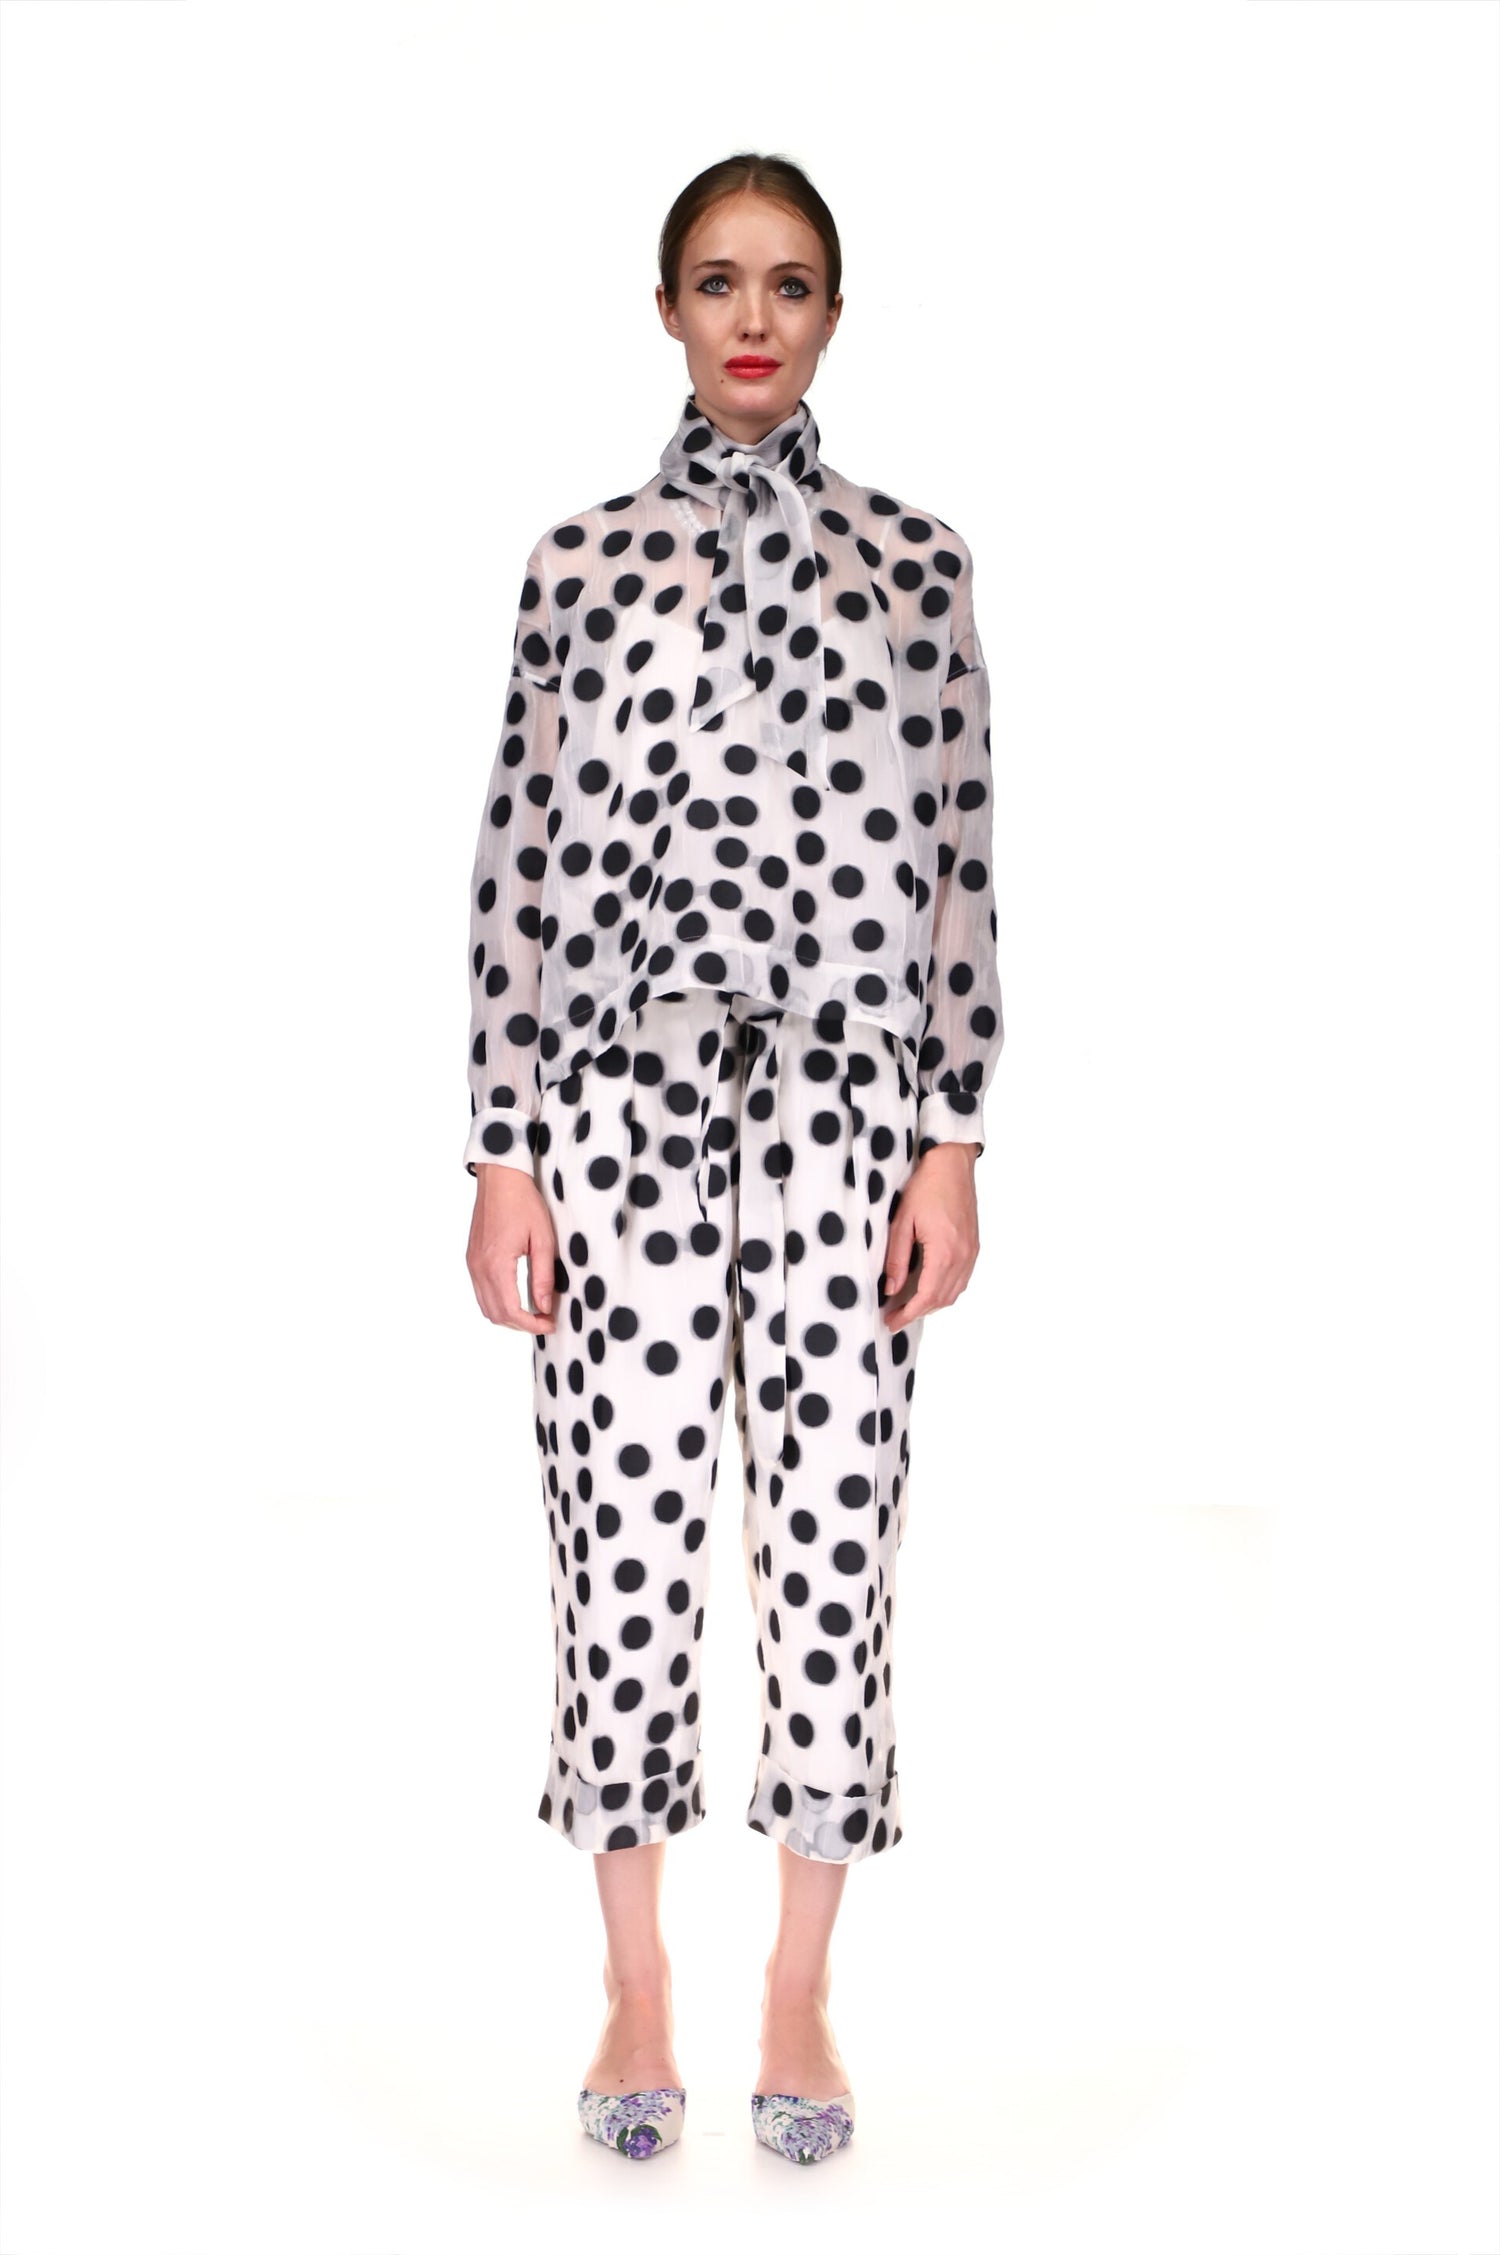 'PEGGY DOTS' TIE BLOUSE - TOPS - Libertine